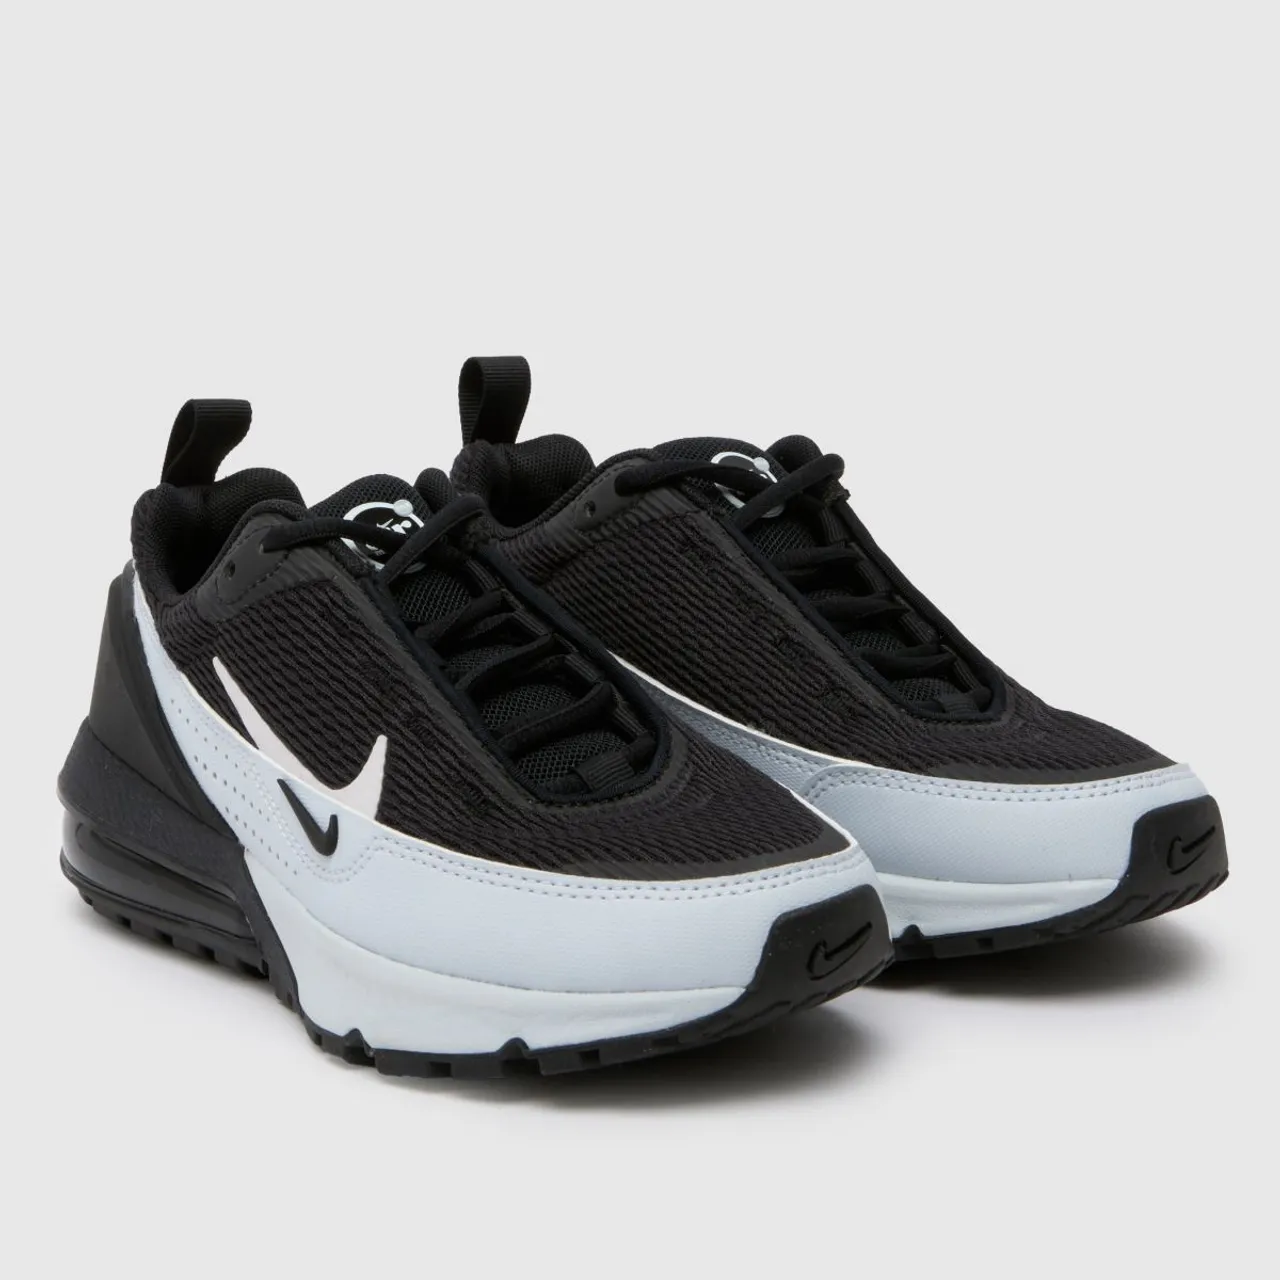 Nike Black & White air max Pulse Boys Youth Trainers